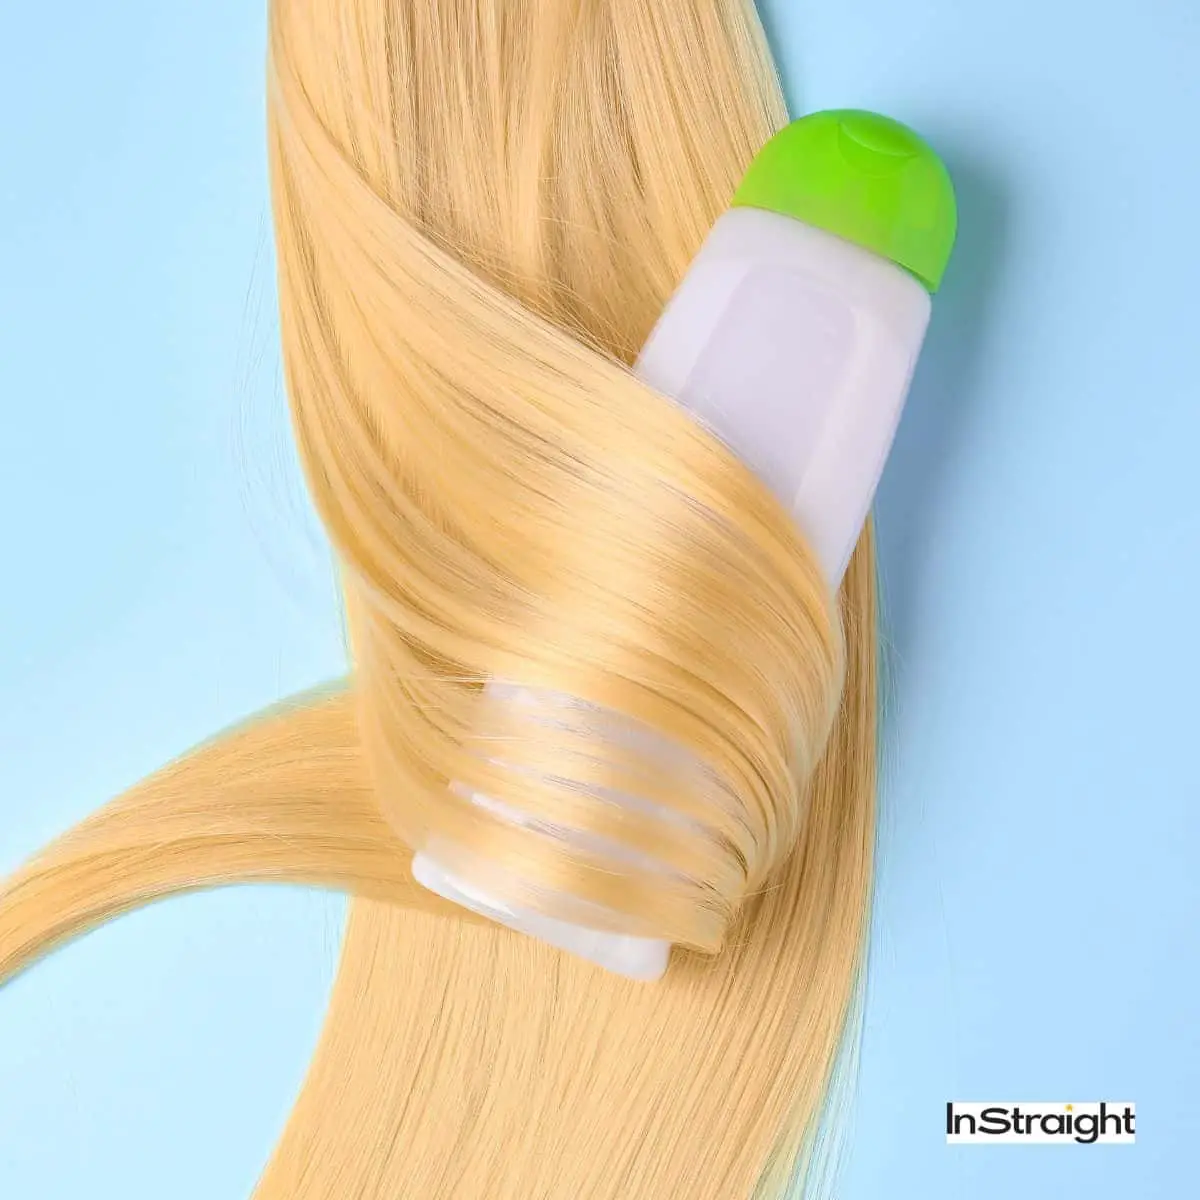 shampoo surrounded by blonde hair